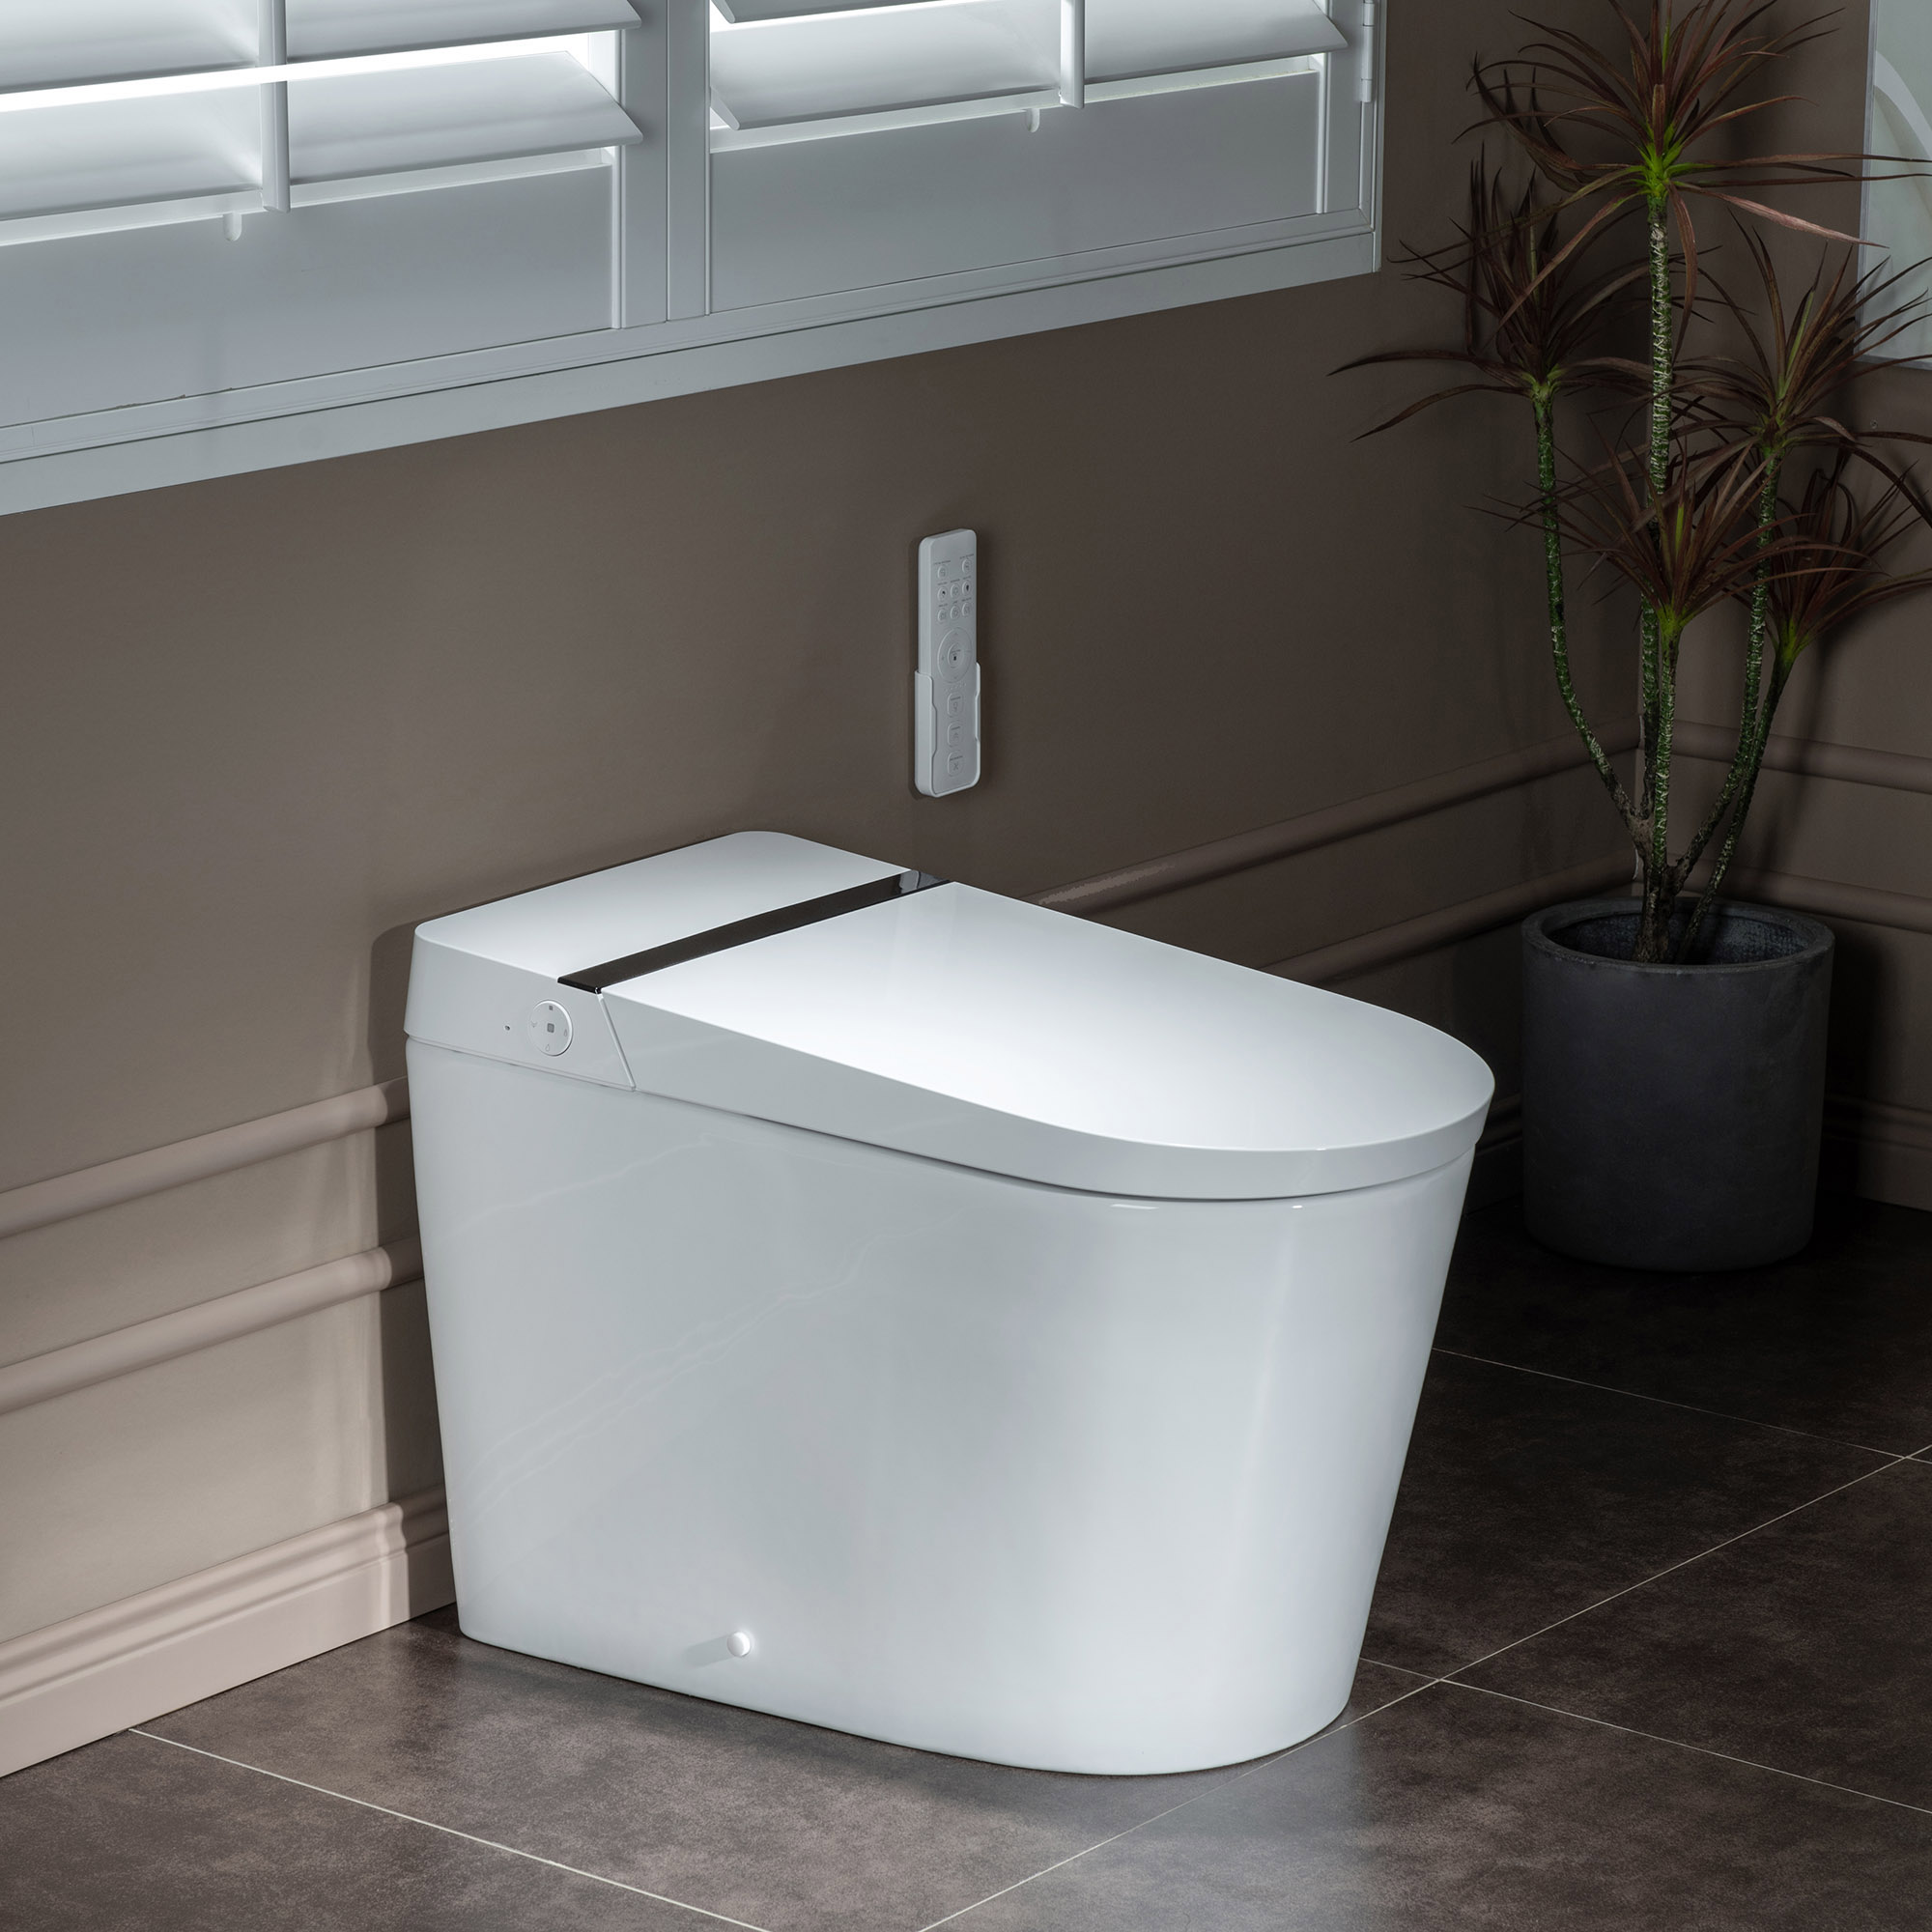  WOODBRIDGE B0990S One Piece Elongated Smart Toilet Bidet with Auto Open & Close, Auto Flush, Foot Sensor Flush, LED Temperature Display, Heated Seat and Integrated Multi Function Remote Control, White_2111